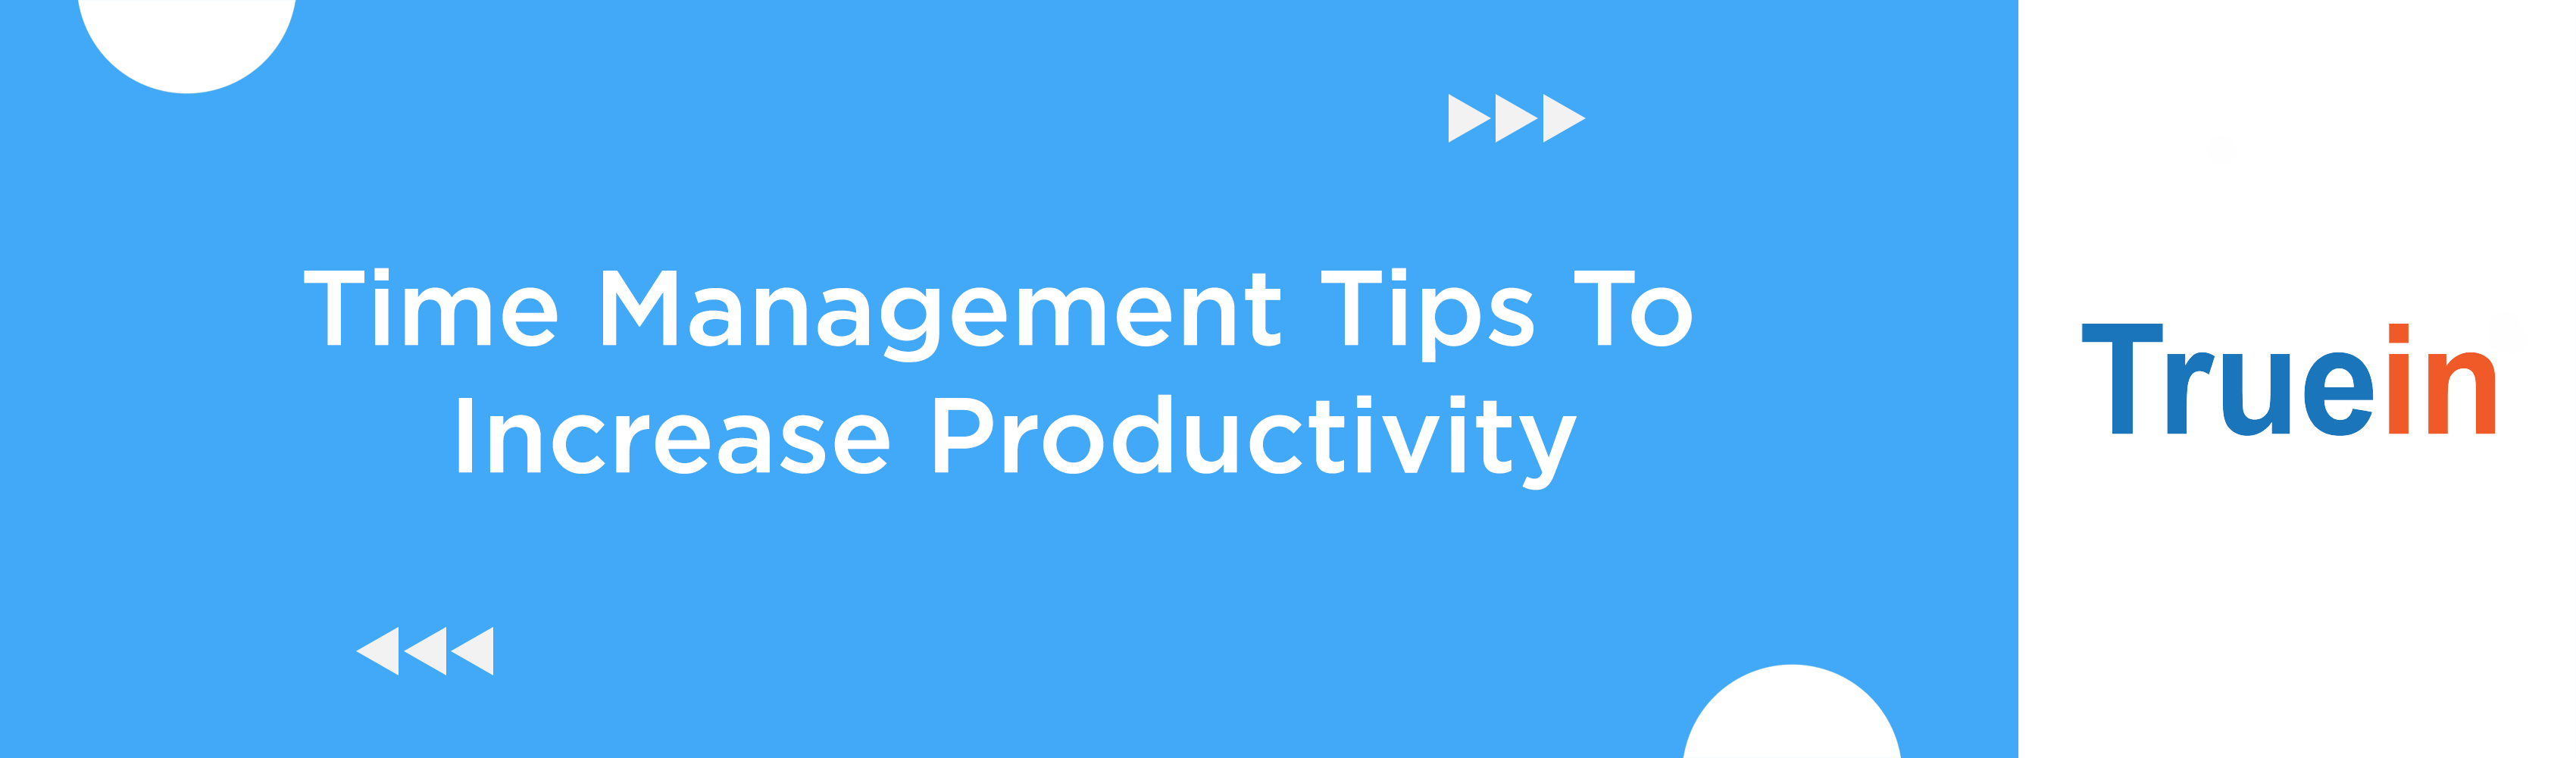 Time Management Tips To Increase Productivity In The Workplace